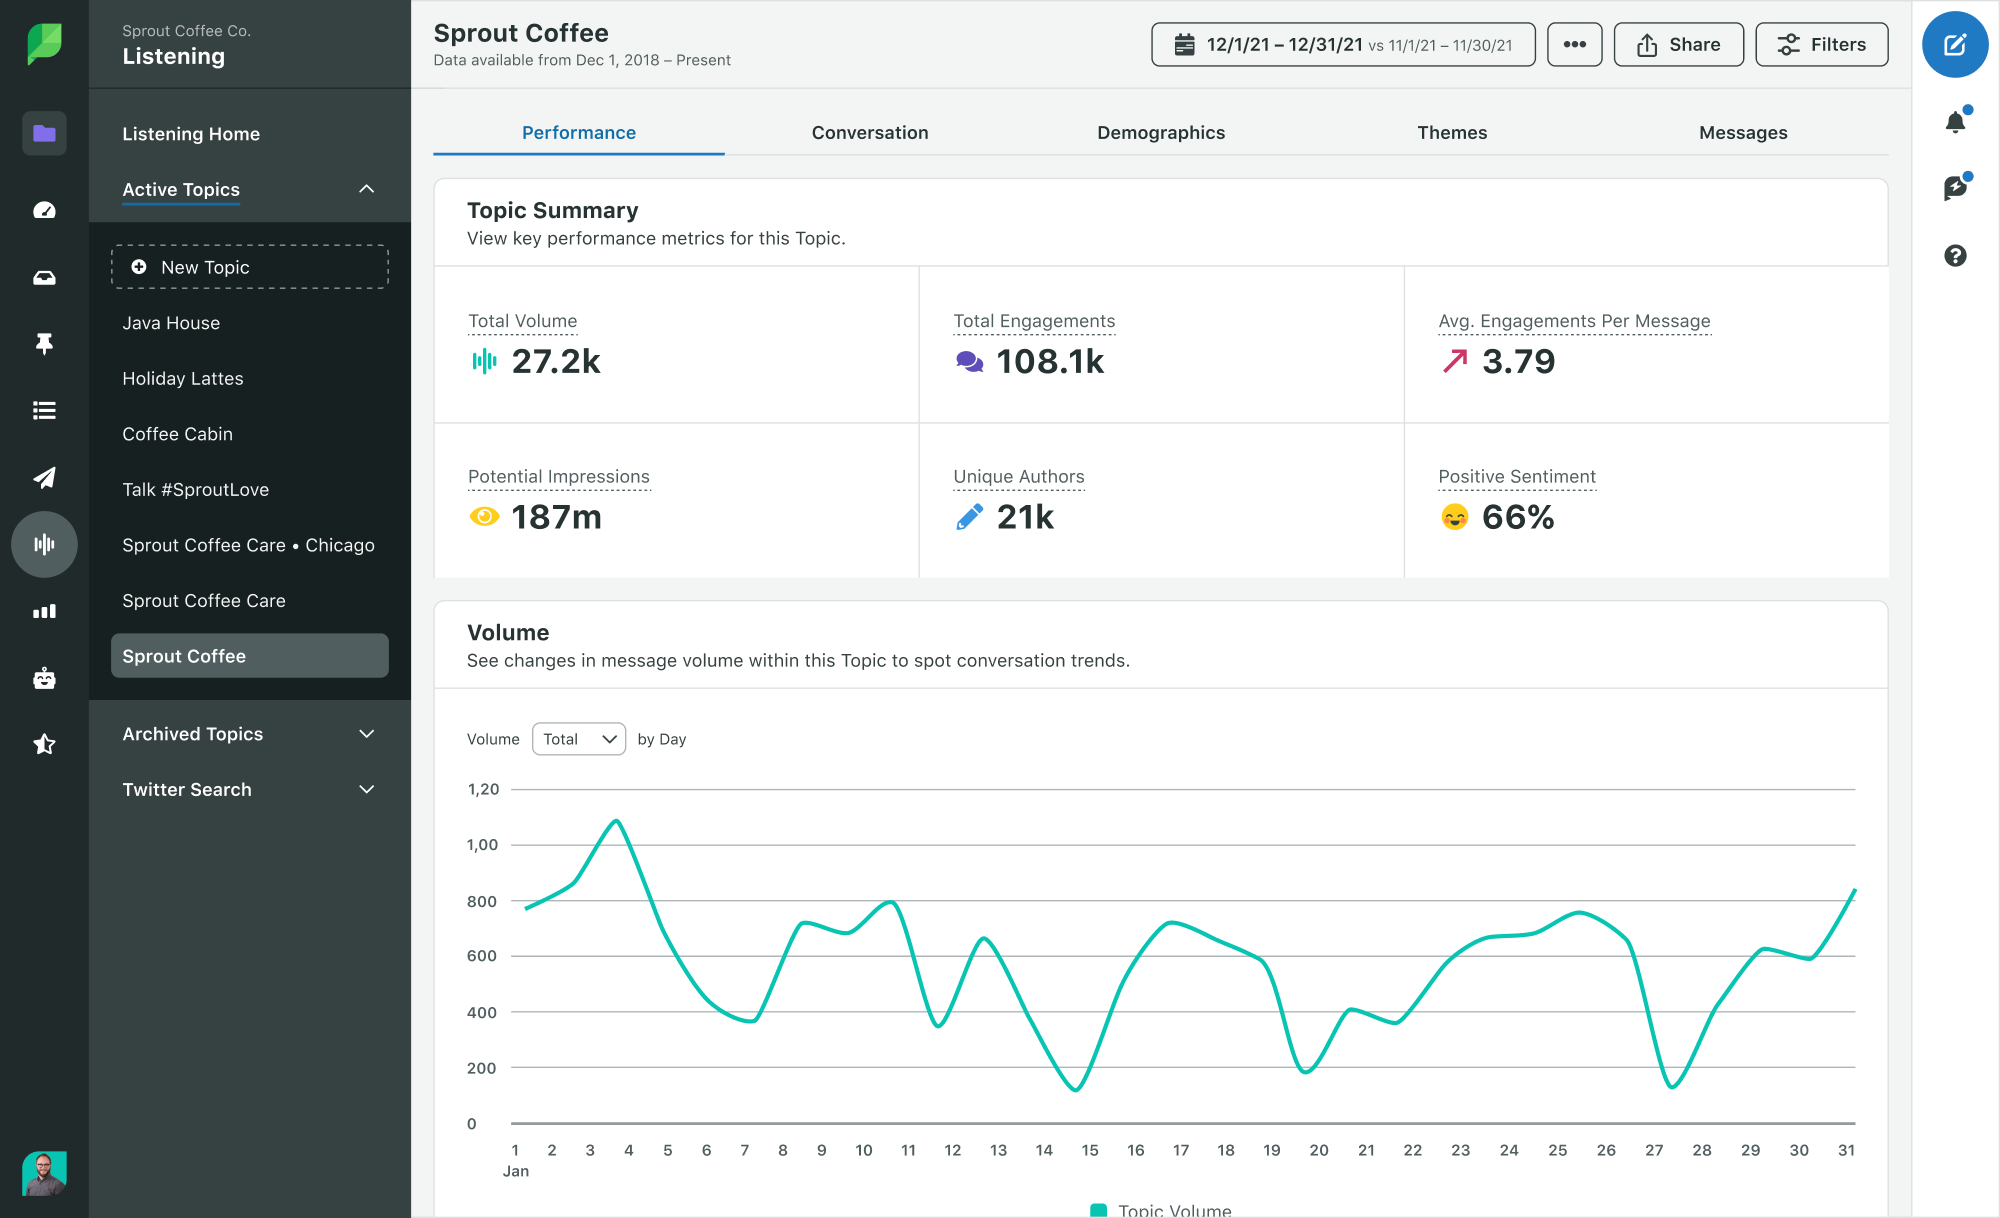 A Listening report from Sprout Social that shows metrics on Topic summary, total engagements, audience sentiment, etc.